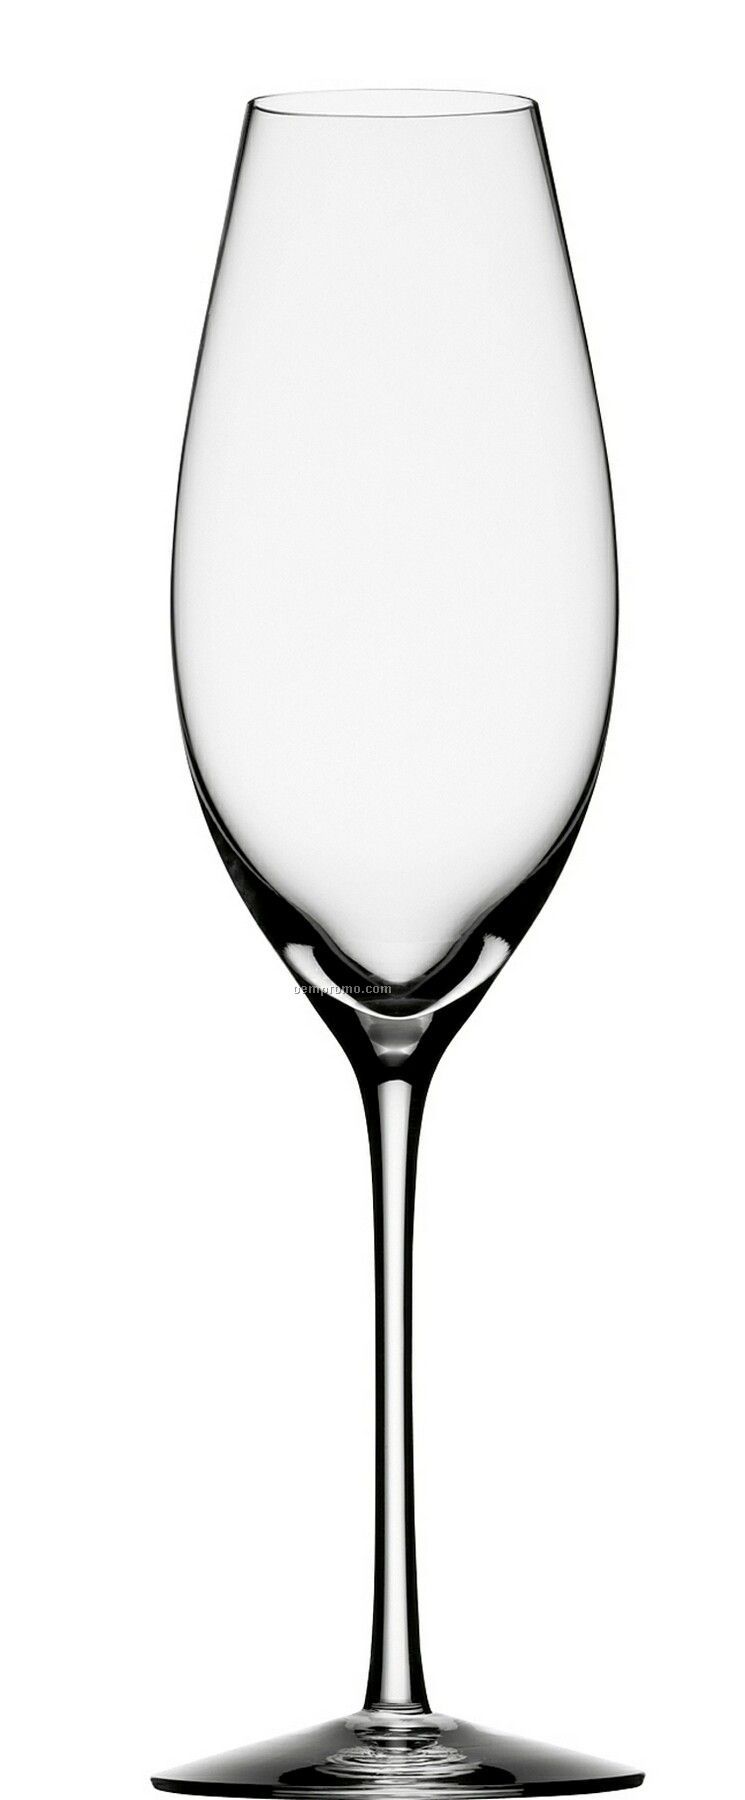 Difference "Sparkling" Crystal Champagne Glass W/ Flavor Enhance Design